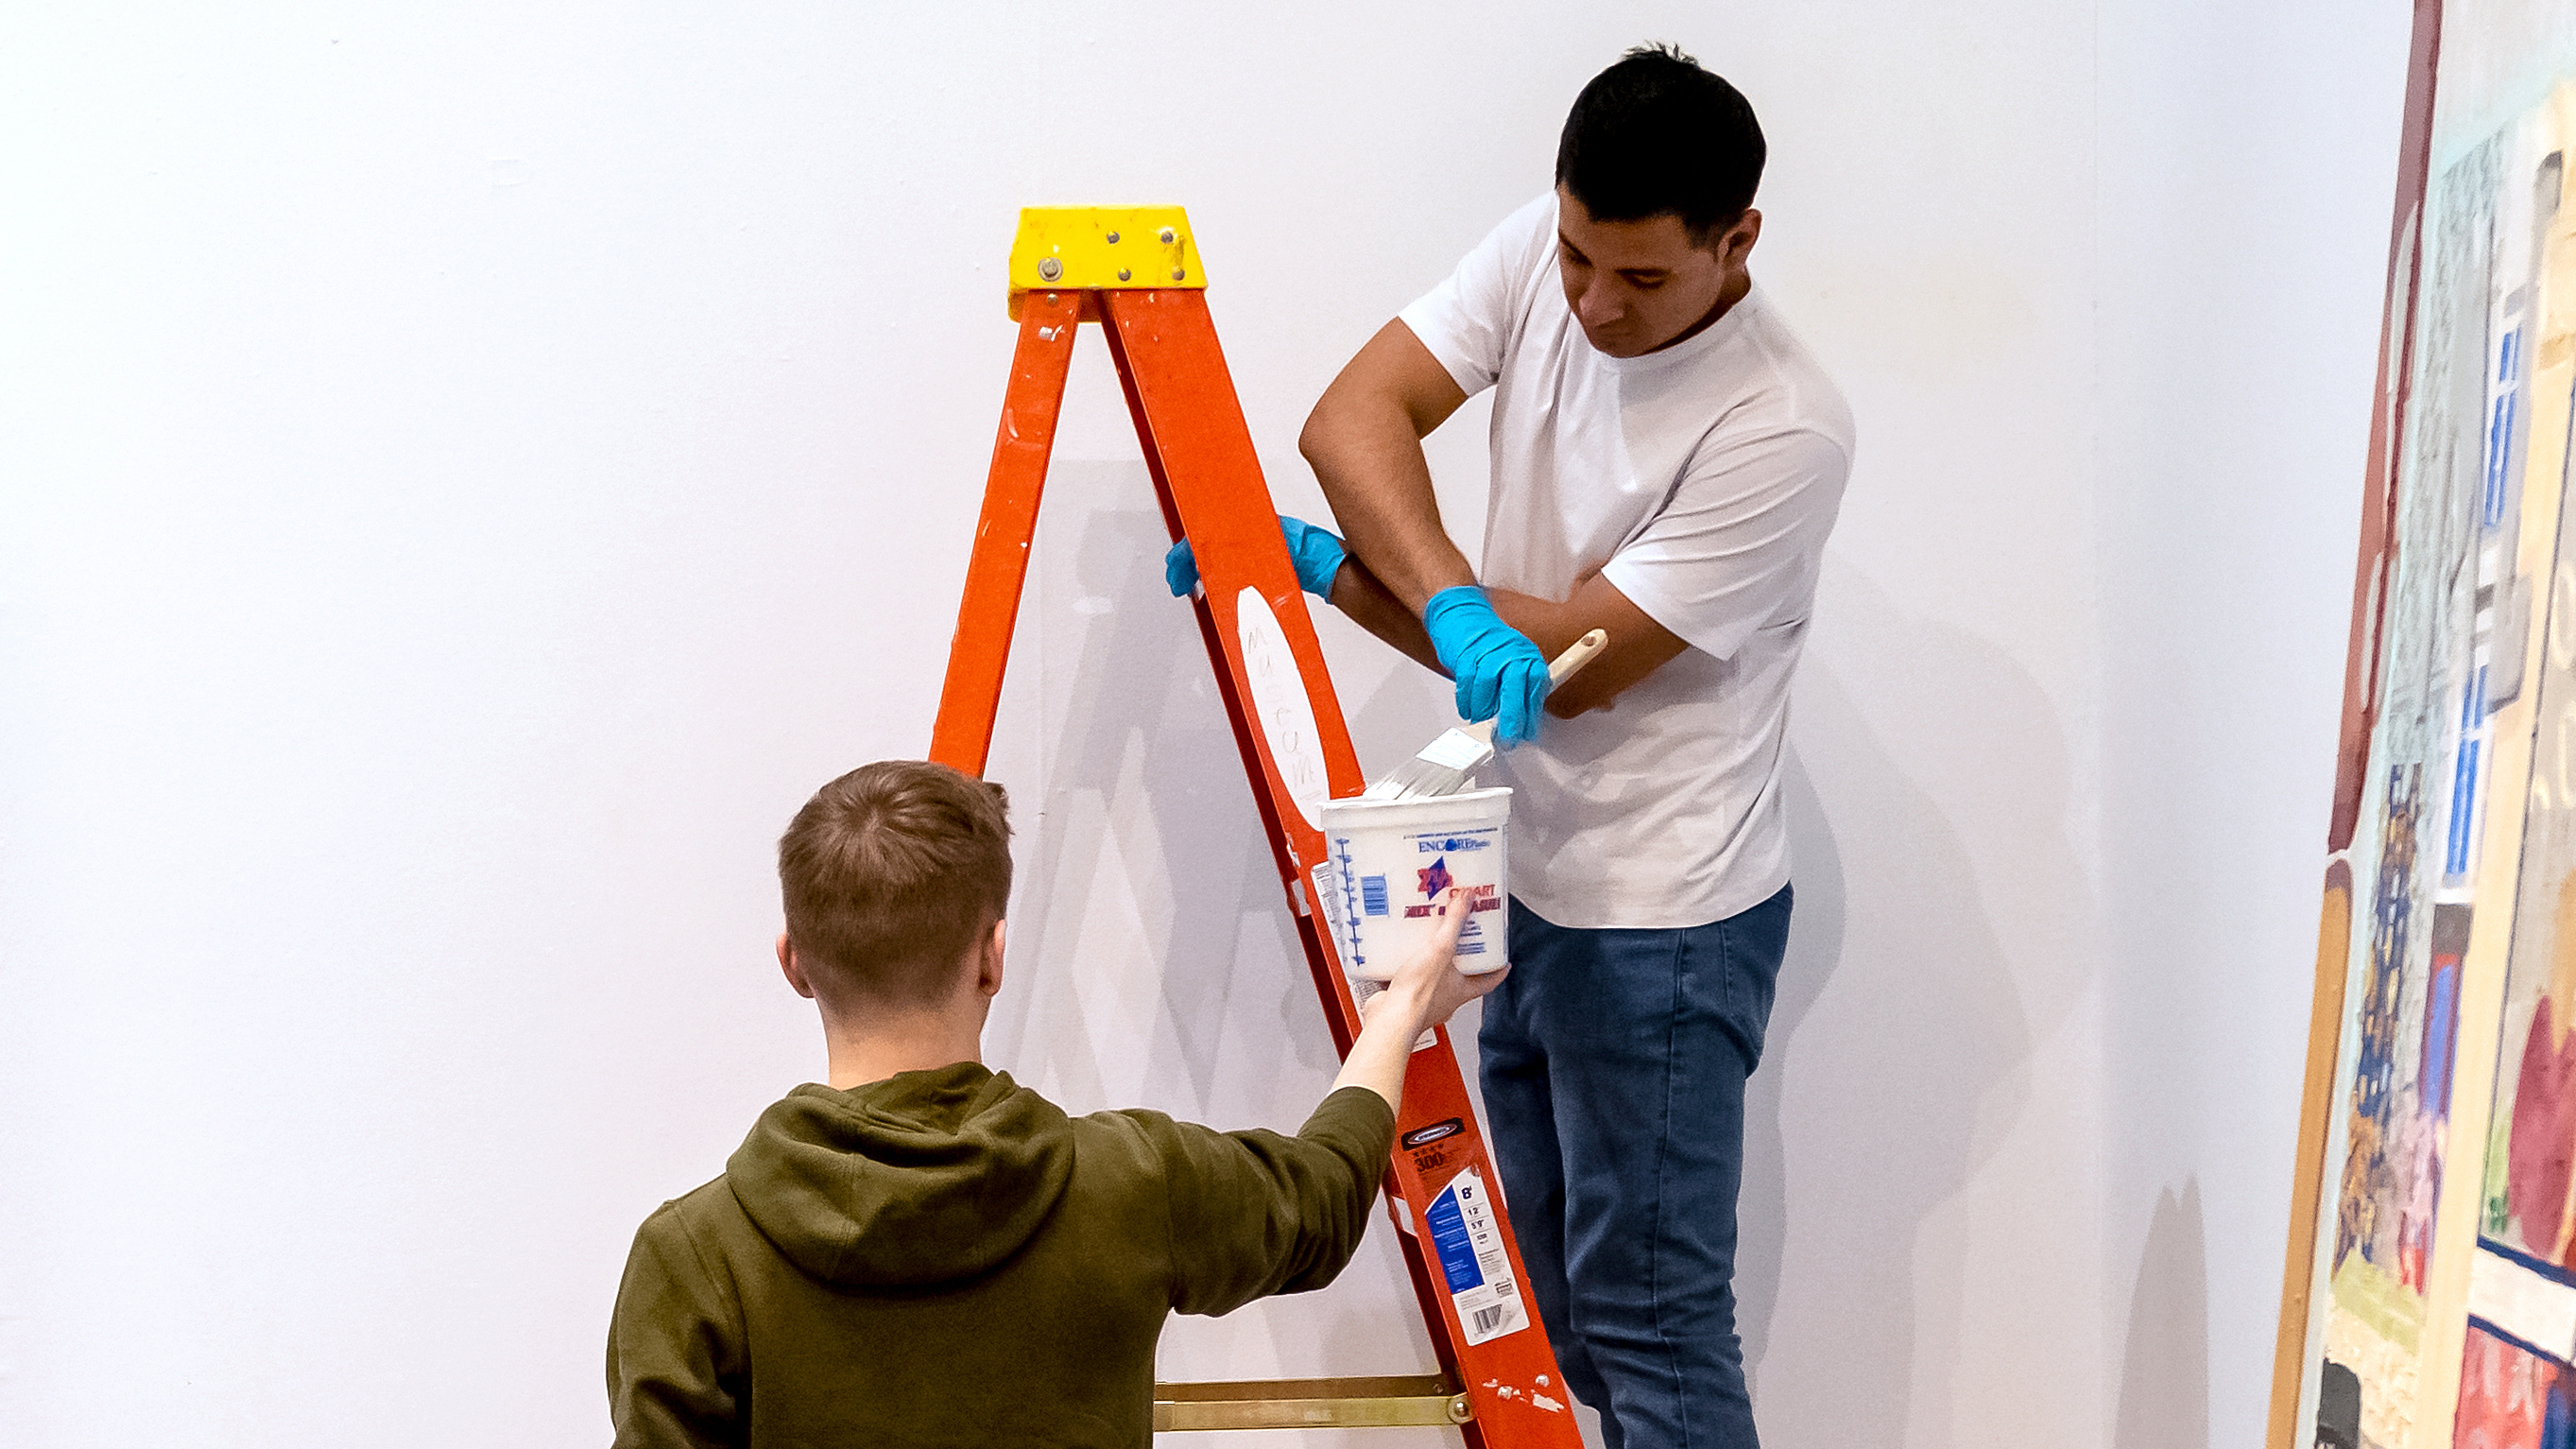 Two college students— one on a ladder with a paint brush and the other holding the paint bucket for his friend